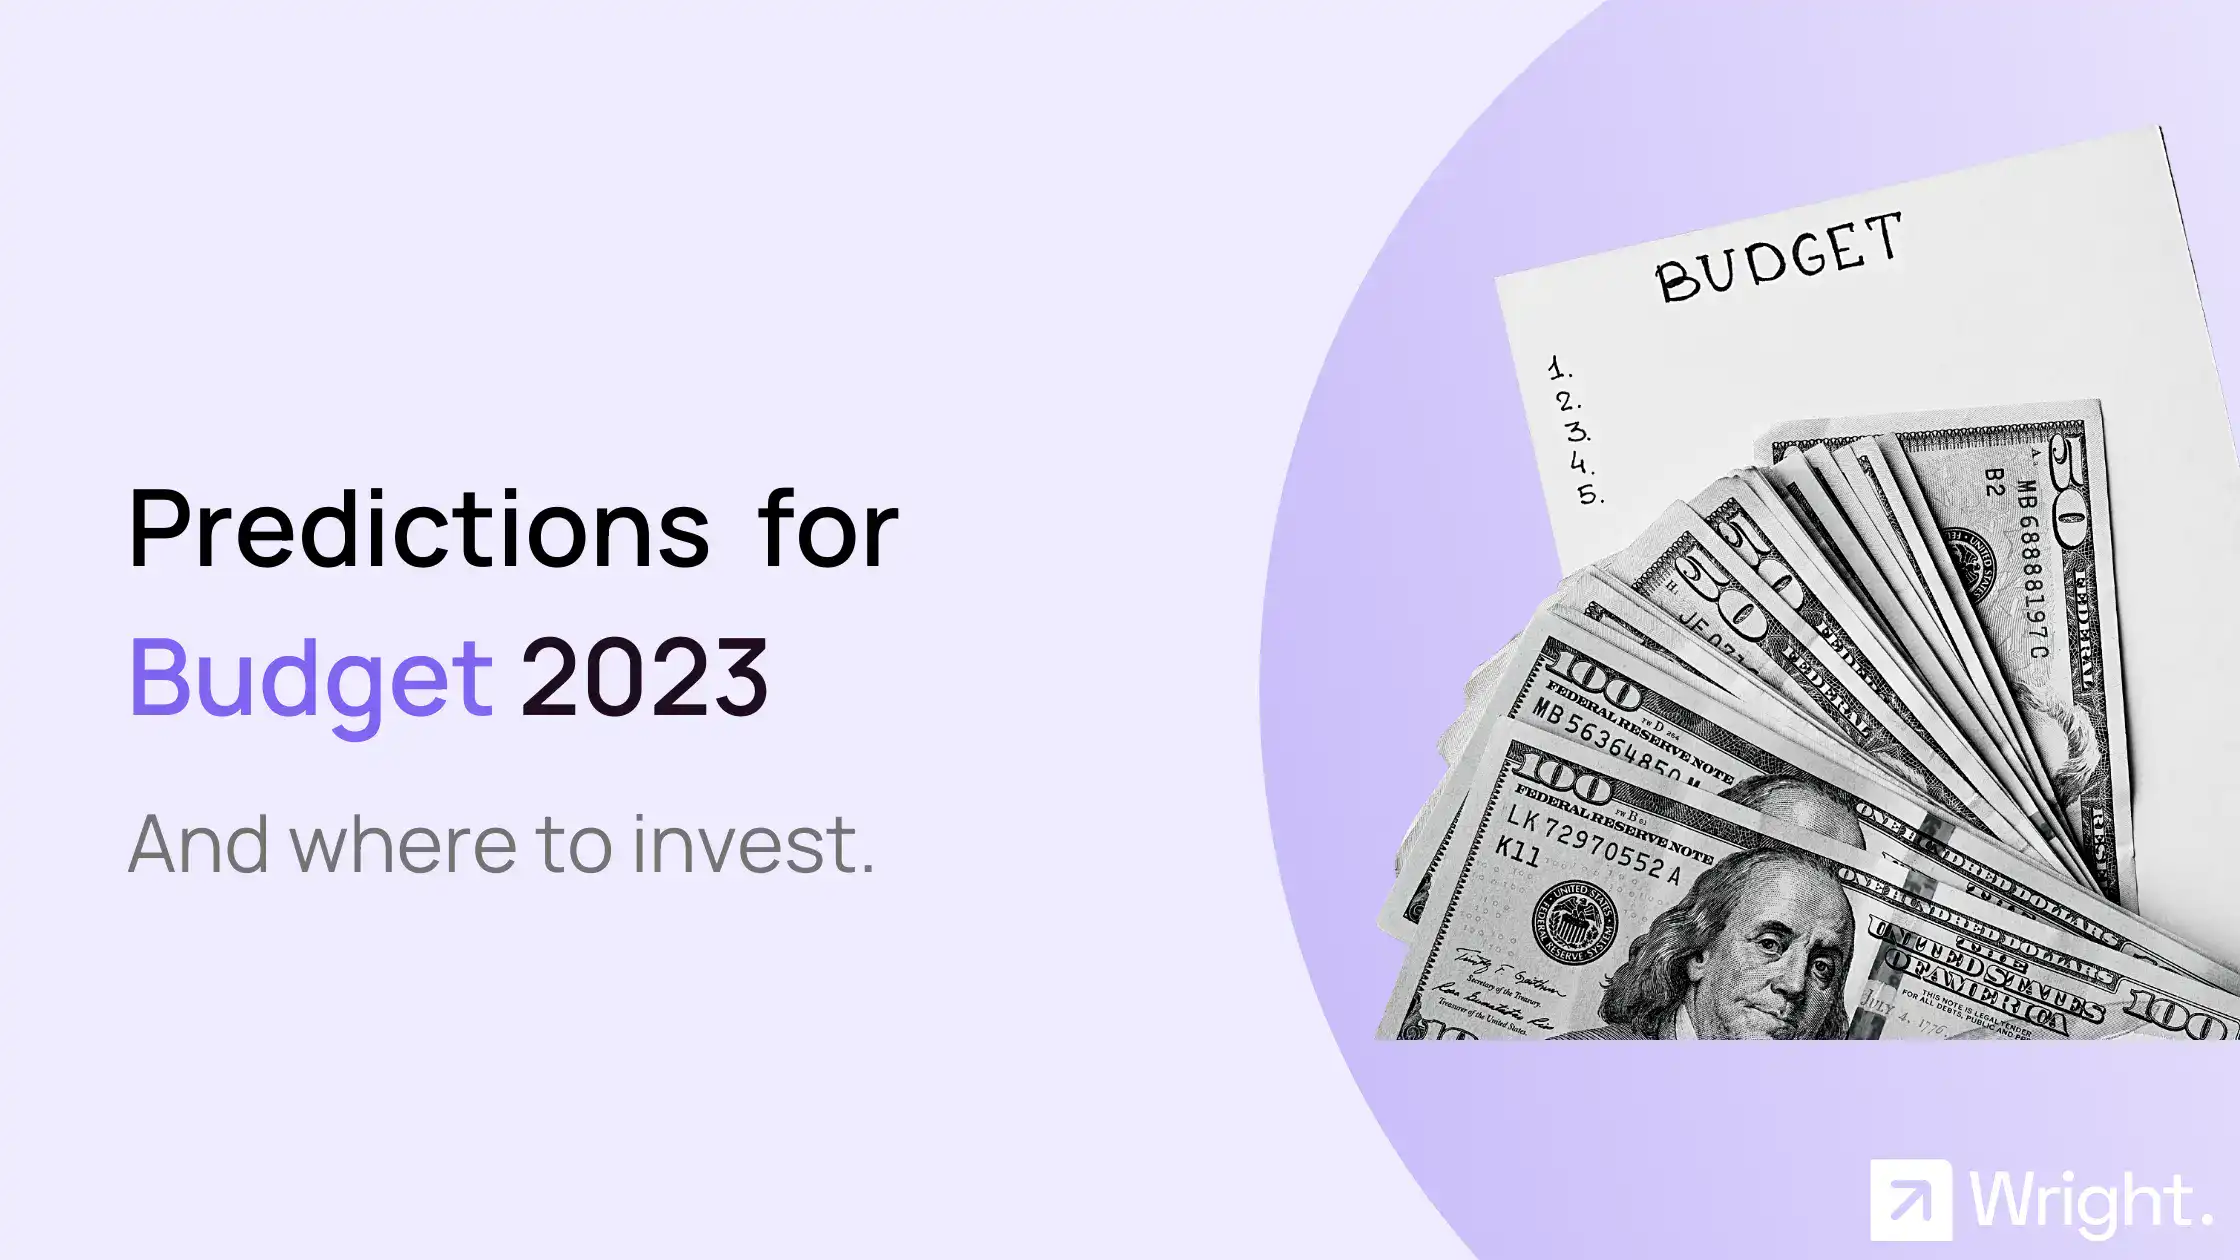 Predictions for the Budget - 2023